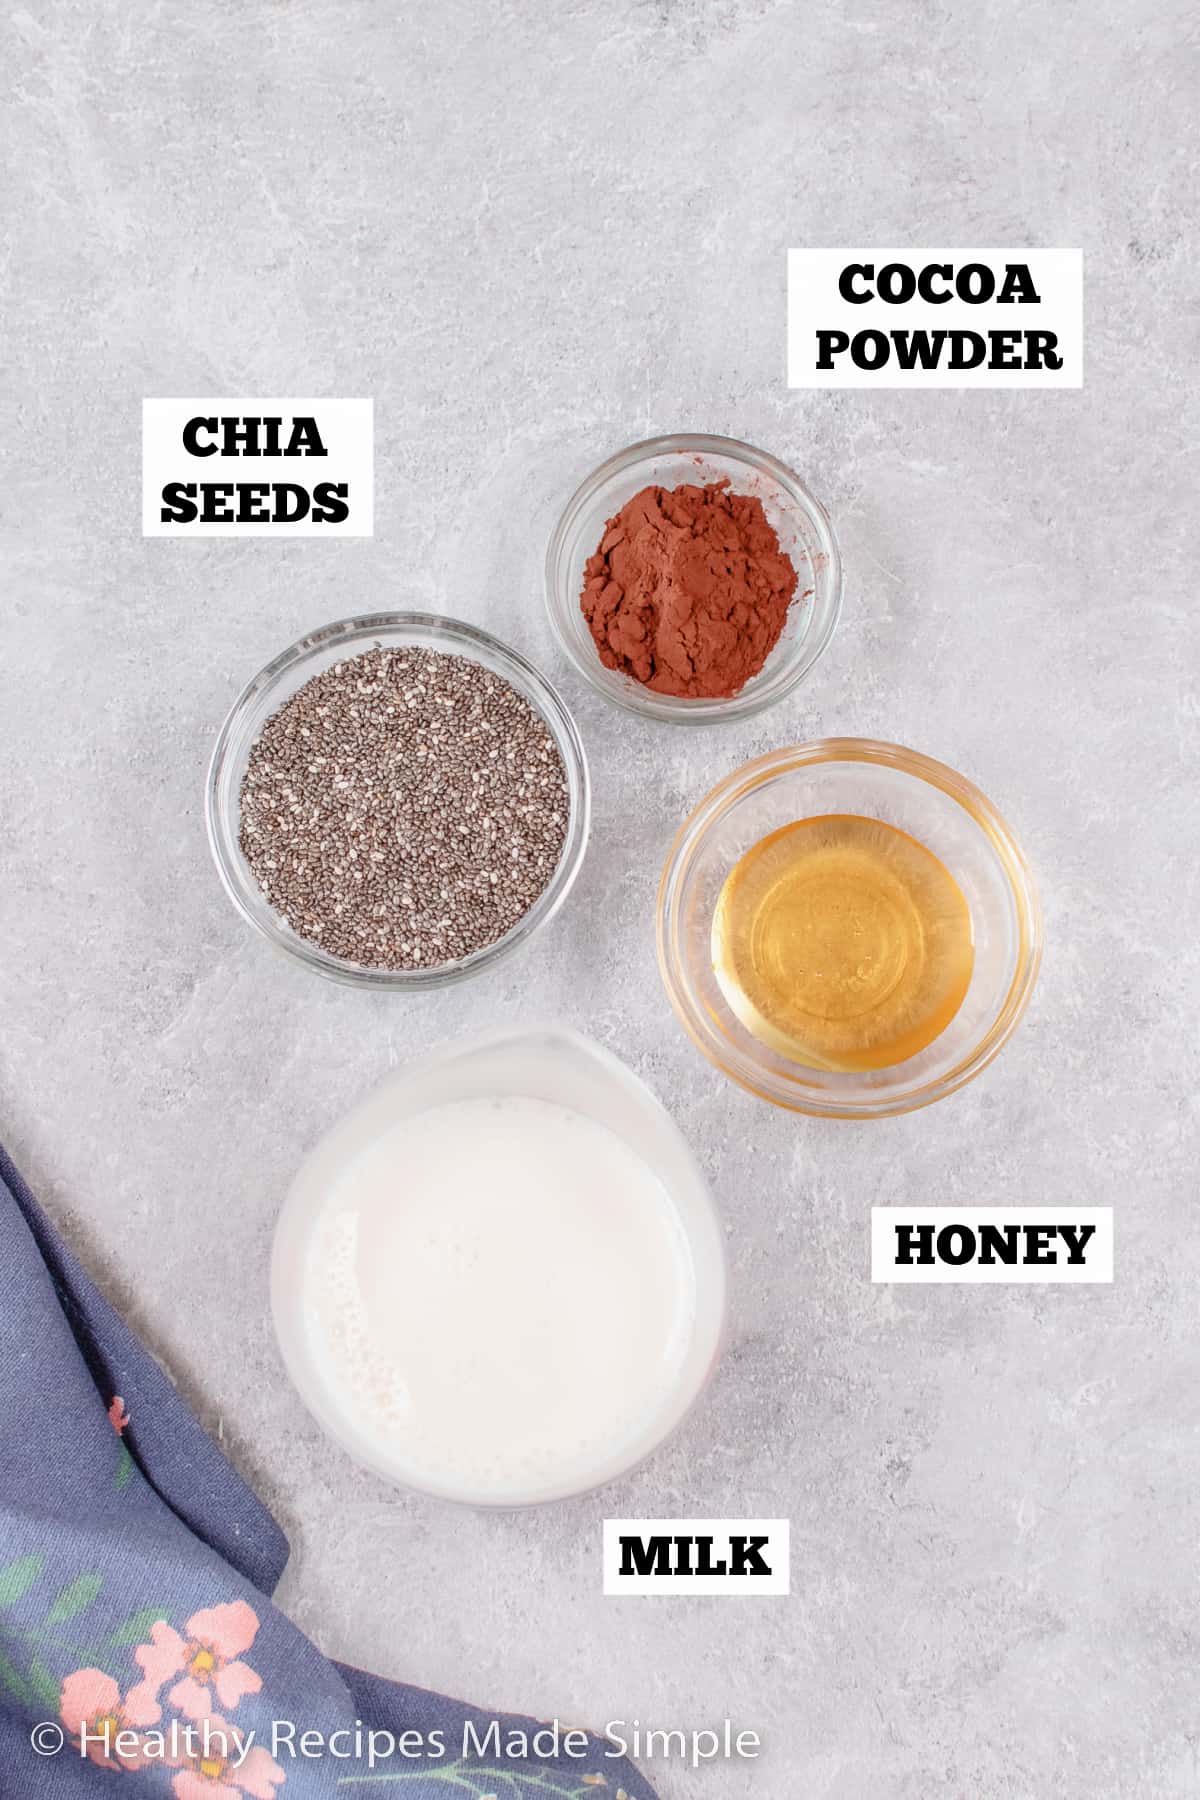 The 4 main ingredients for Chocolate Chia Pudding.